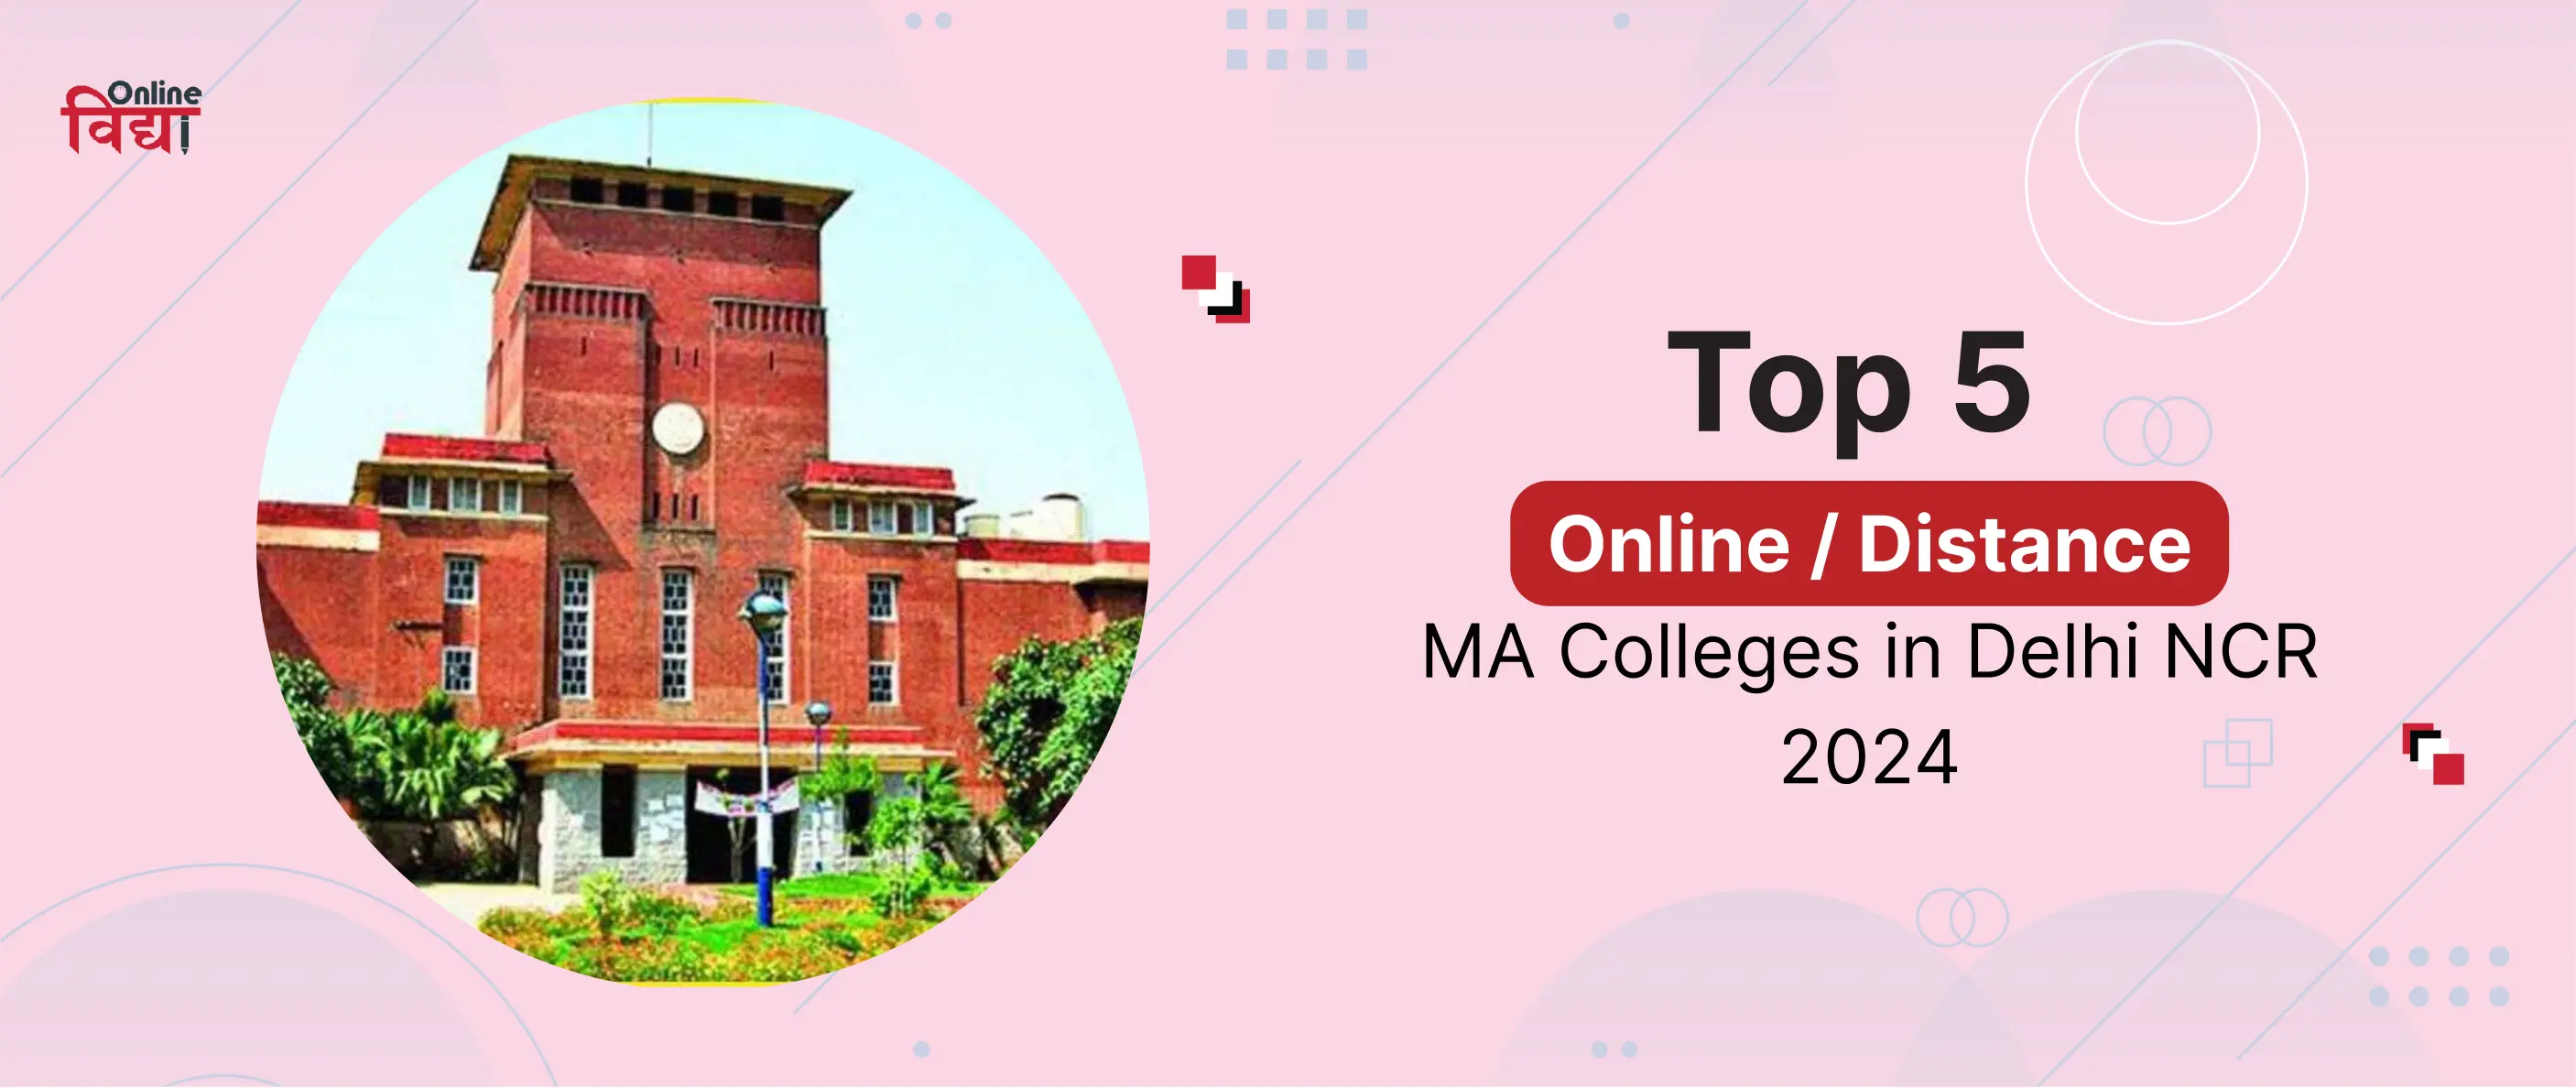 Top 5 online /Distance MA Colleges in Delhi NCR 2024